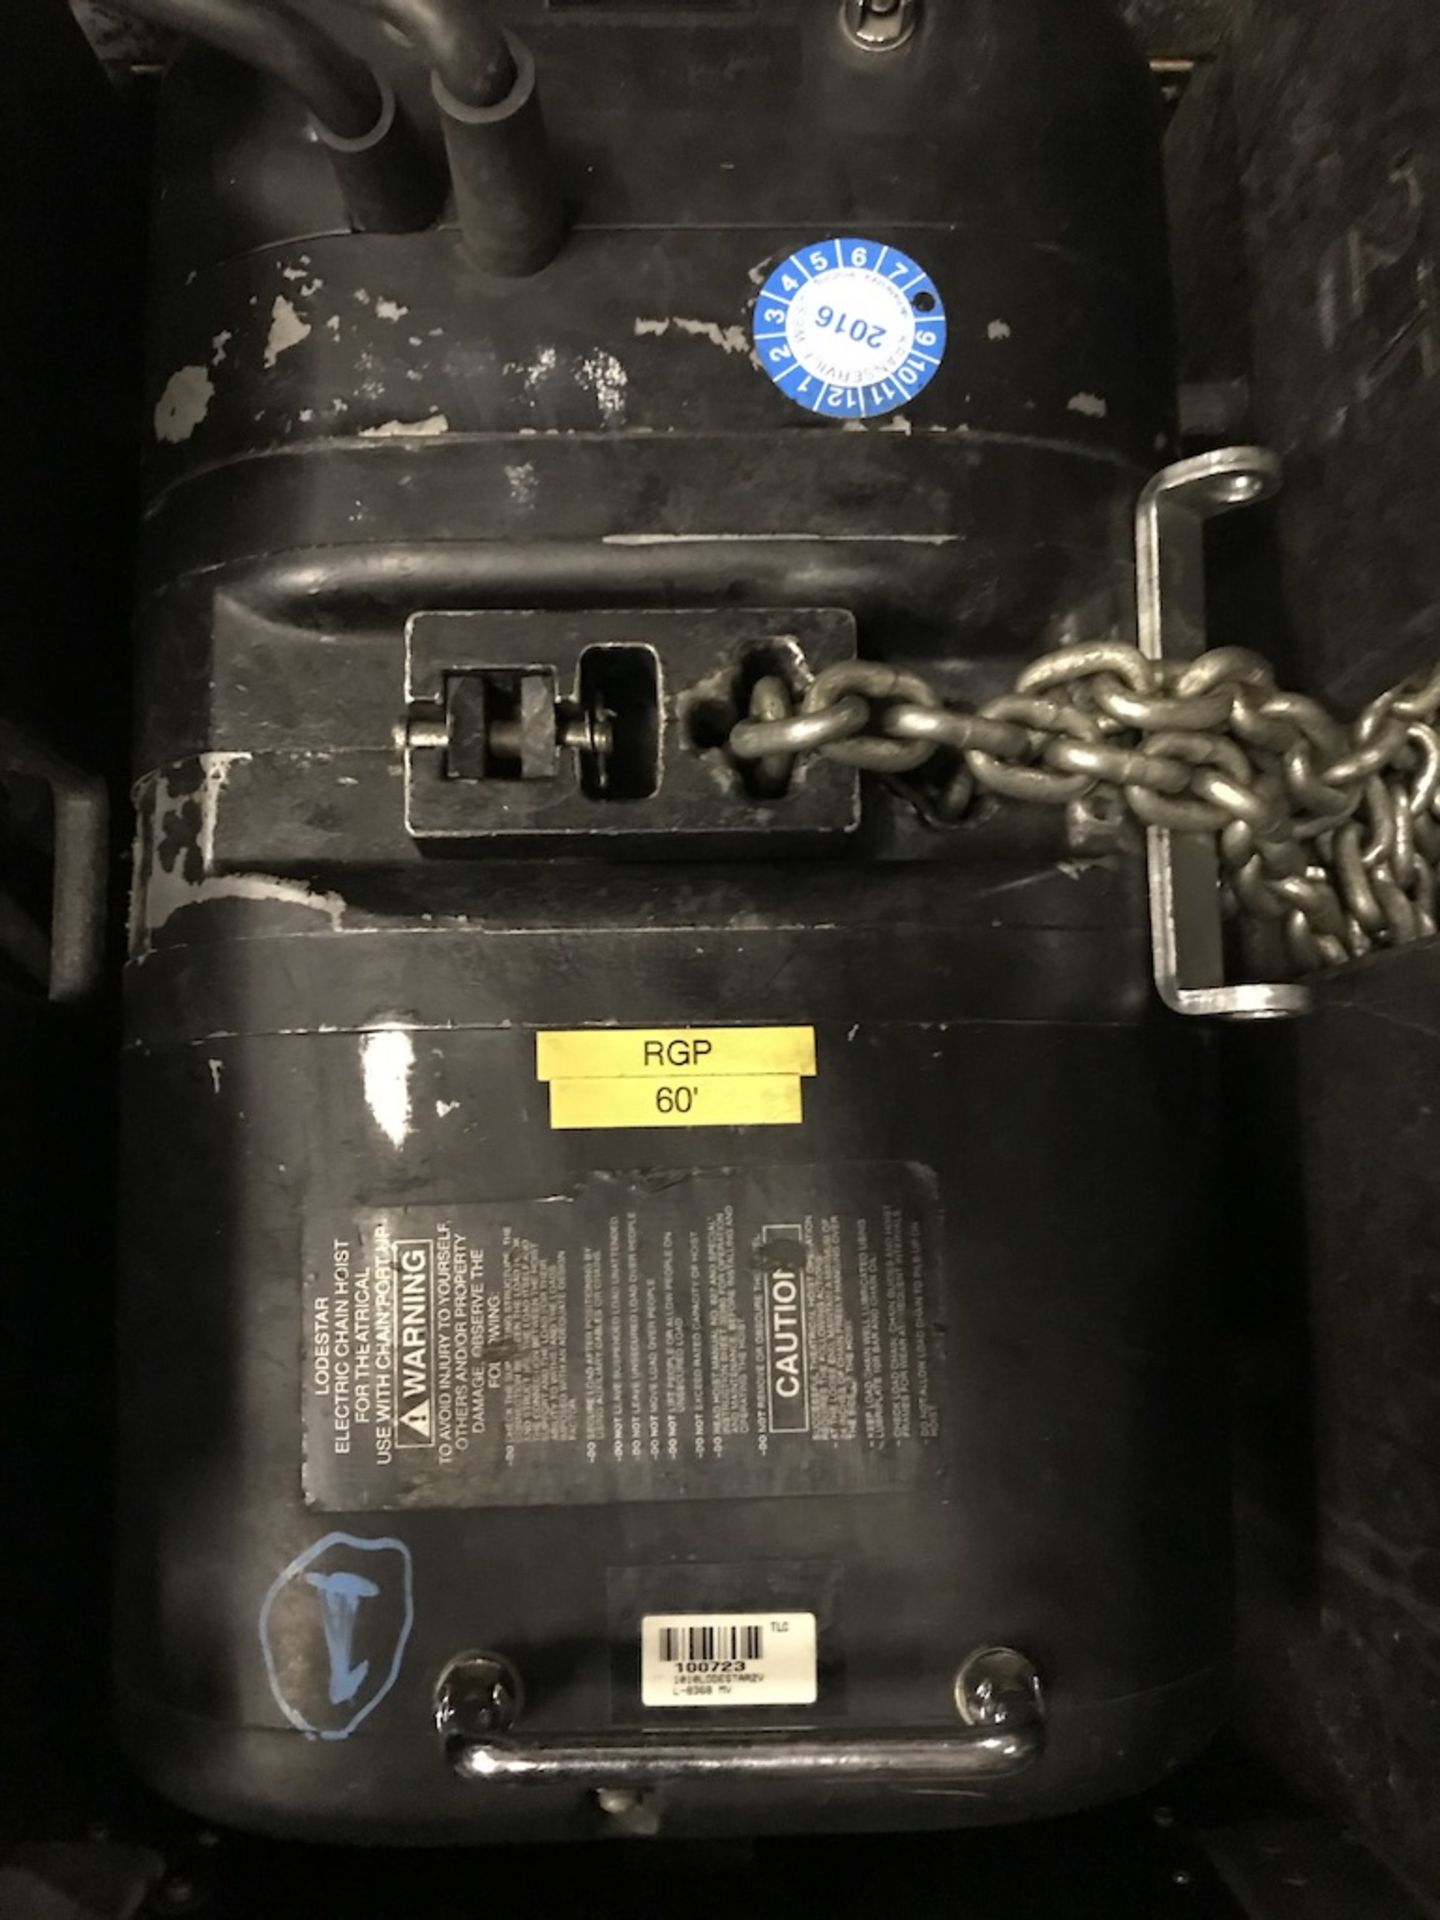 LOT OF: (1) ATLANTA RIGGING SYSTEMS LODESTAR ELECTRIC CHAIN HOIST RATED FOR 2 TON W/ 60' OF CHAIN - Image 3 of 4